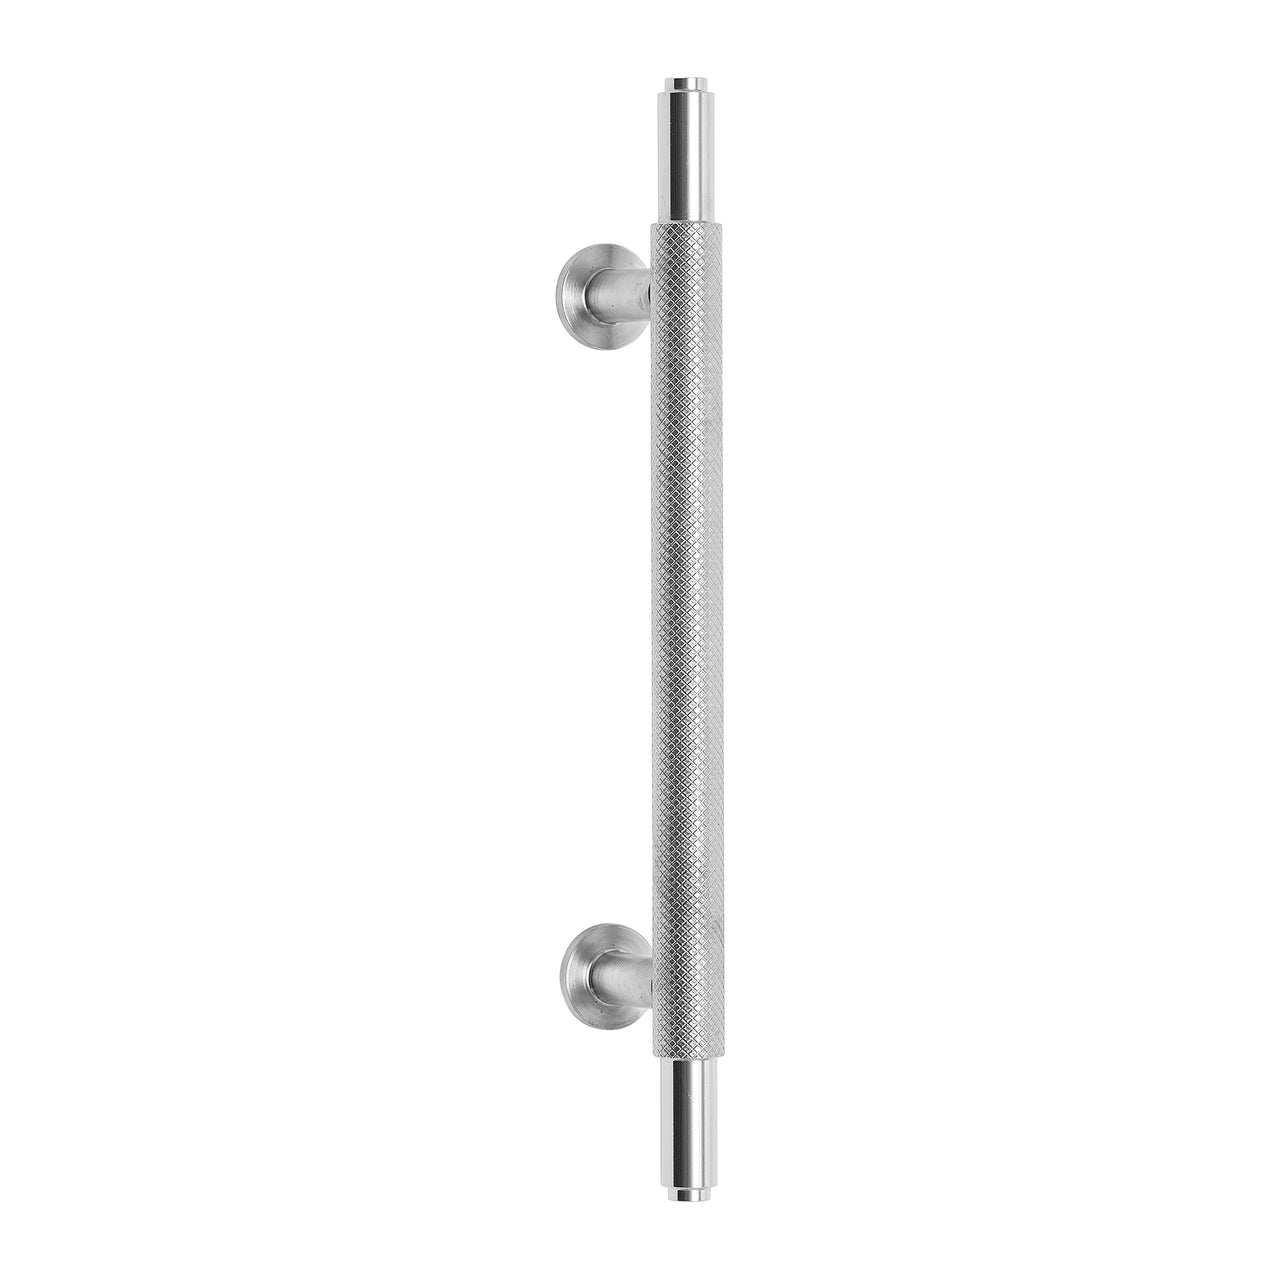 Knurled Stainless Steel T-Bar Drawer/Cabinet Pull Handle - 96mm, 128mm, 192mm Centres